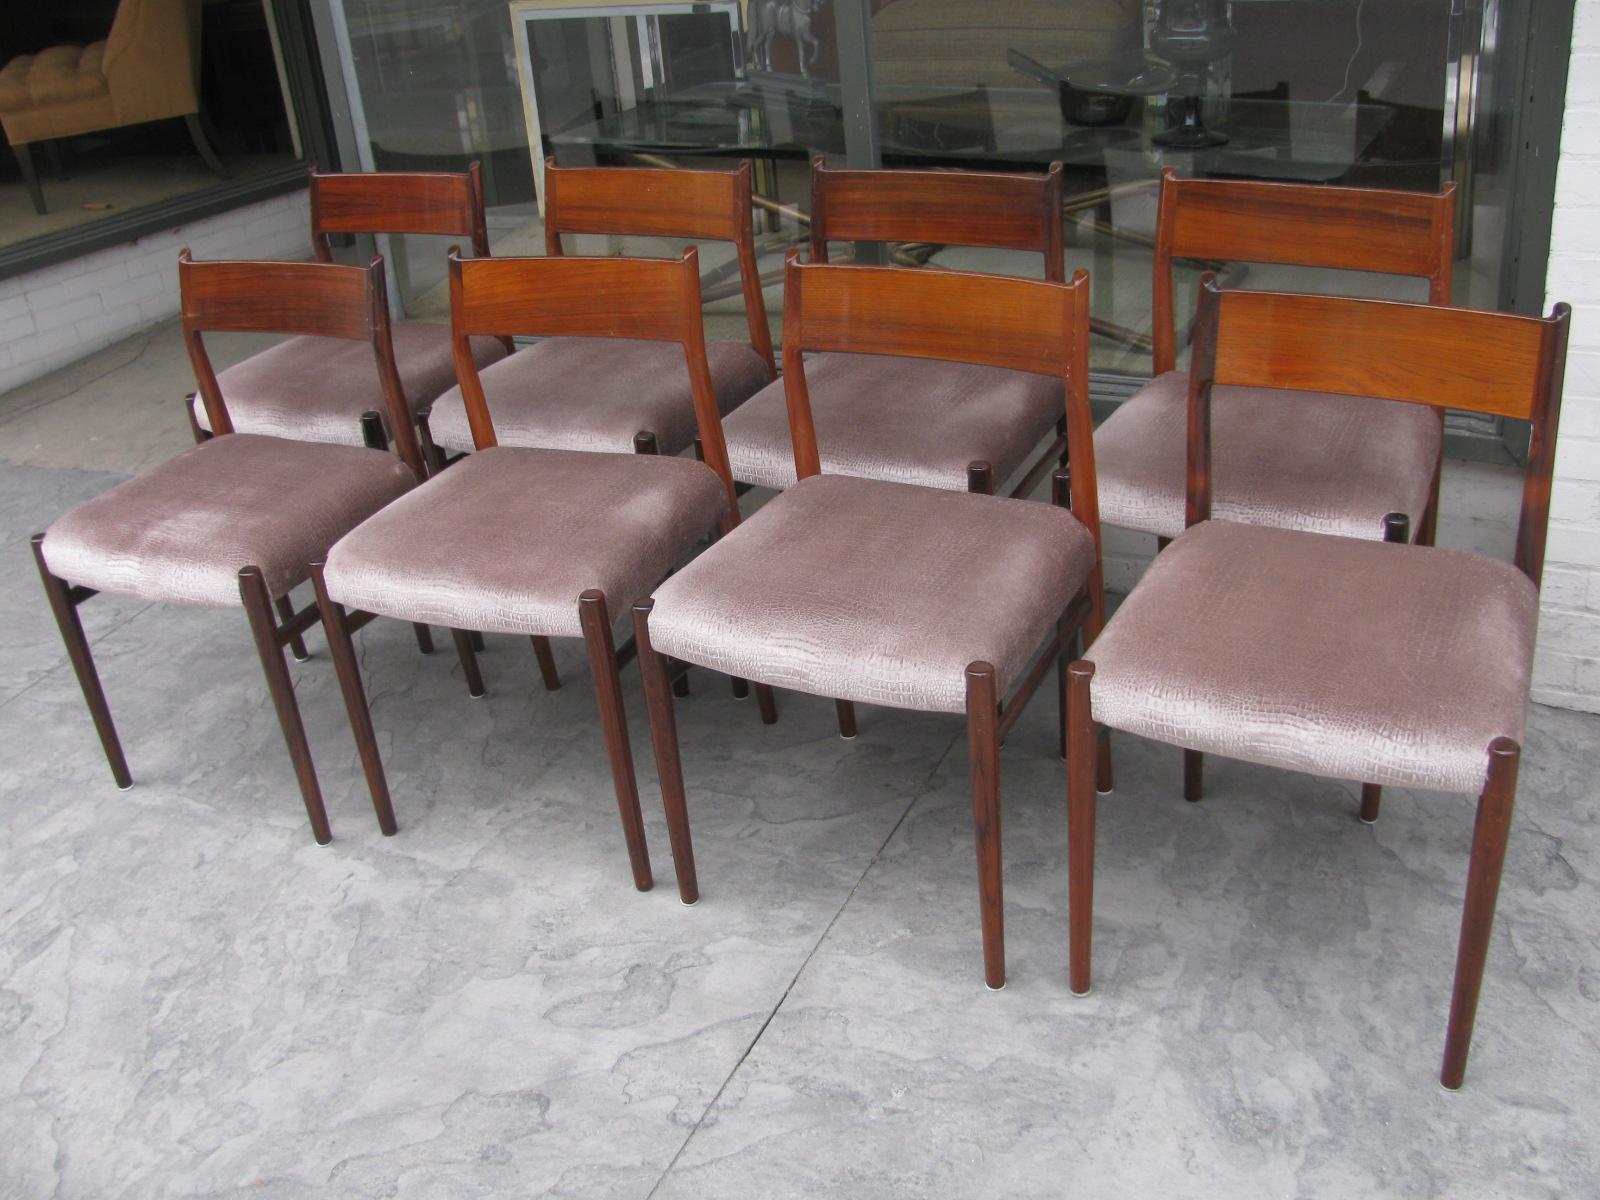 Fabulous set of eight solid rosewood dining chairs model #418 by Arne Vodder. Upholstered in a faux suede animal skin. Chairs are in excellent vintage condition, very tight and sturdy, normal scuffs to the finish.